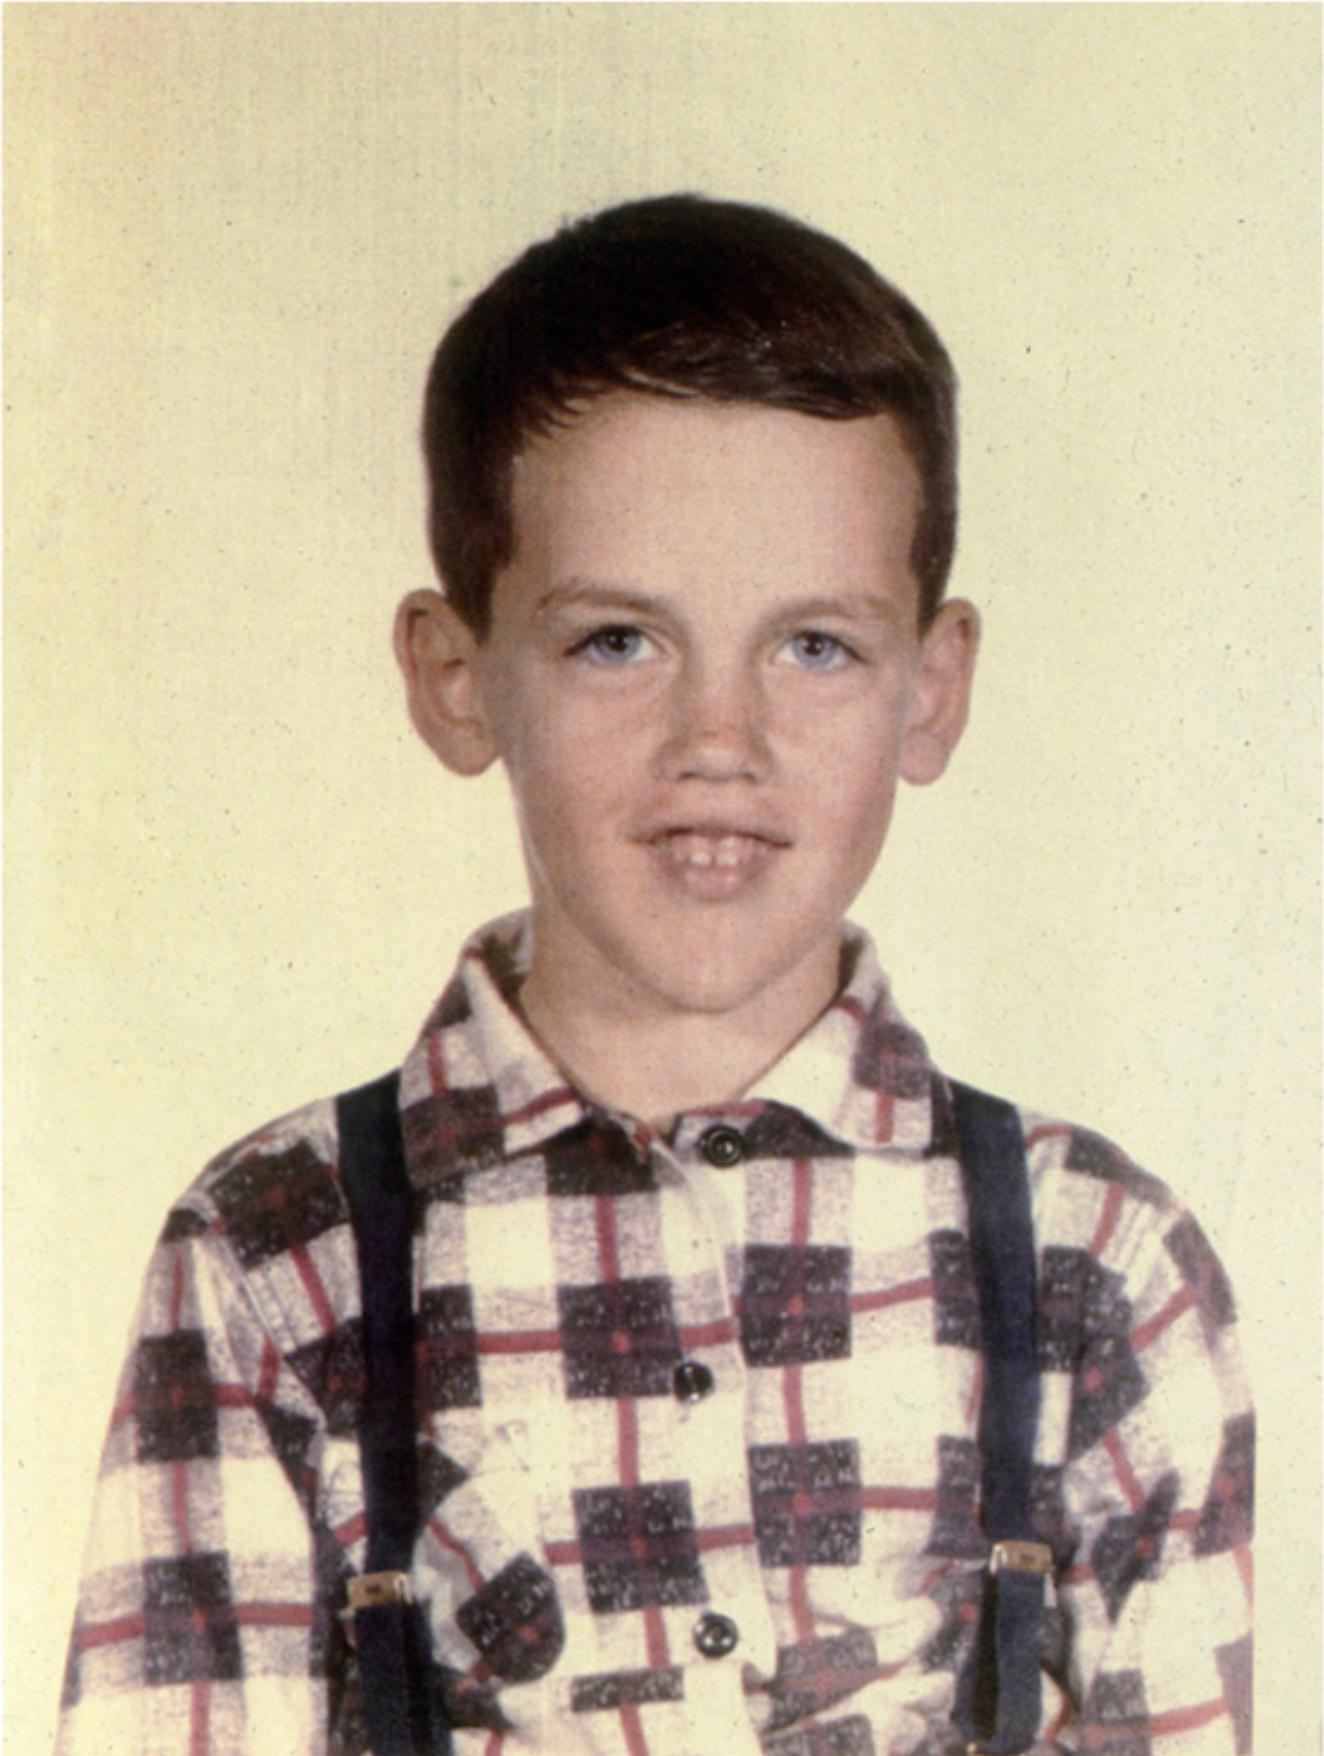 School portrait of David Wojnarowicz circa 1959. Courtesy The David Wojnarowicz Papers in The Downtown Collection courtesy Fales Library and Collections, New York University